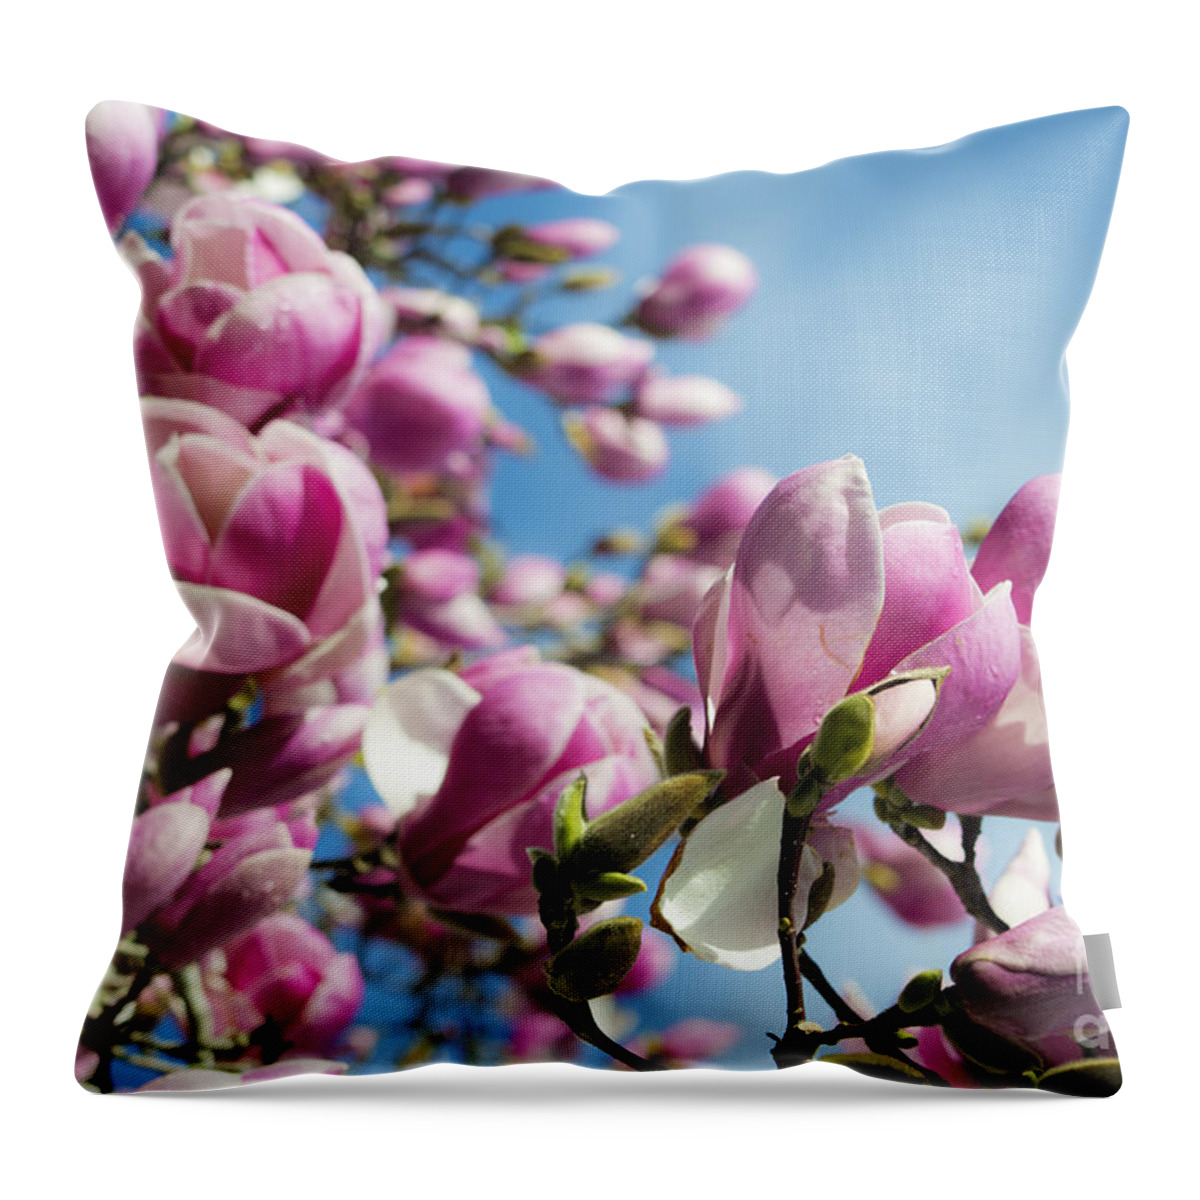 Magnolia Throw Pillow featuring the photograph Early Spring Magnolia by Angela DeFrias